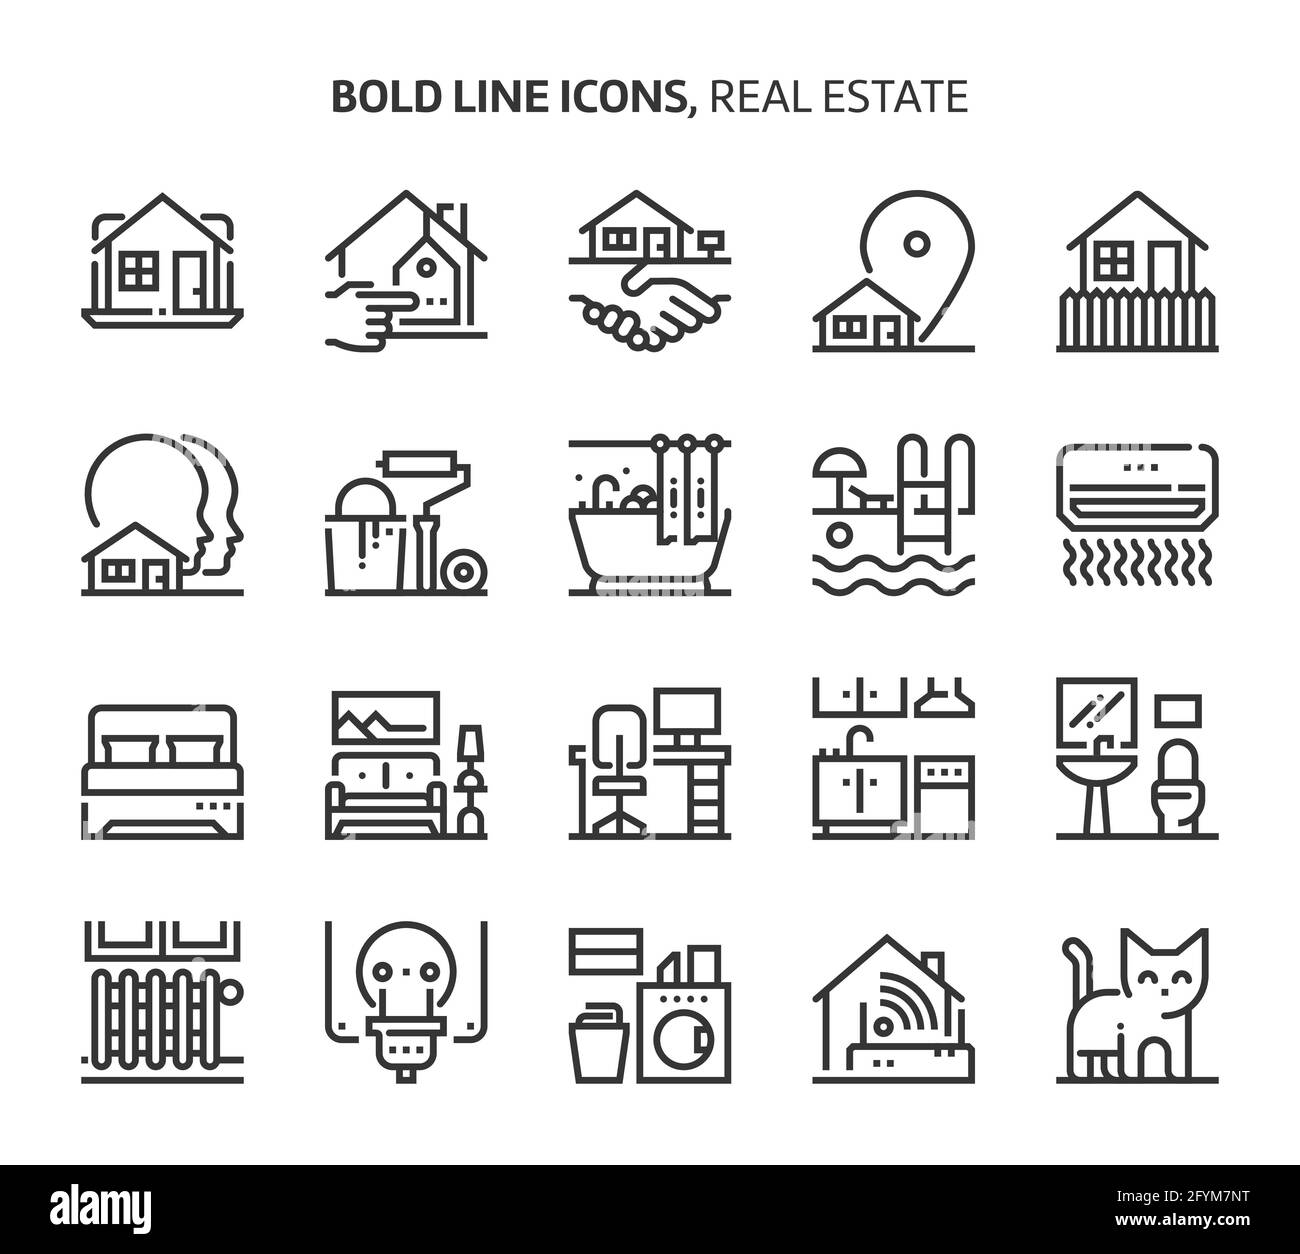 Real estate, bold line icons. The illustrations are a vector, editable stroke, 48x48 pixel perfect files. Crafted with precision and eye for quality. Stock Vector